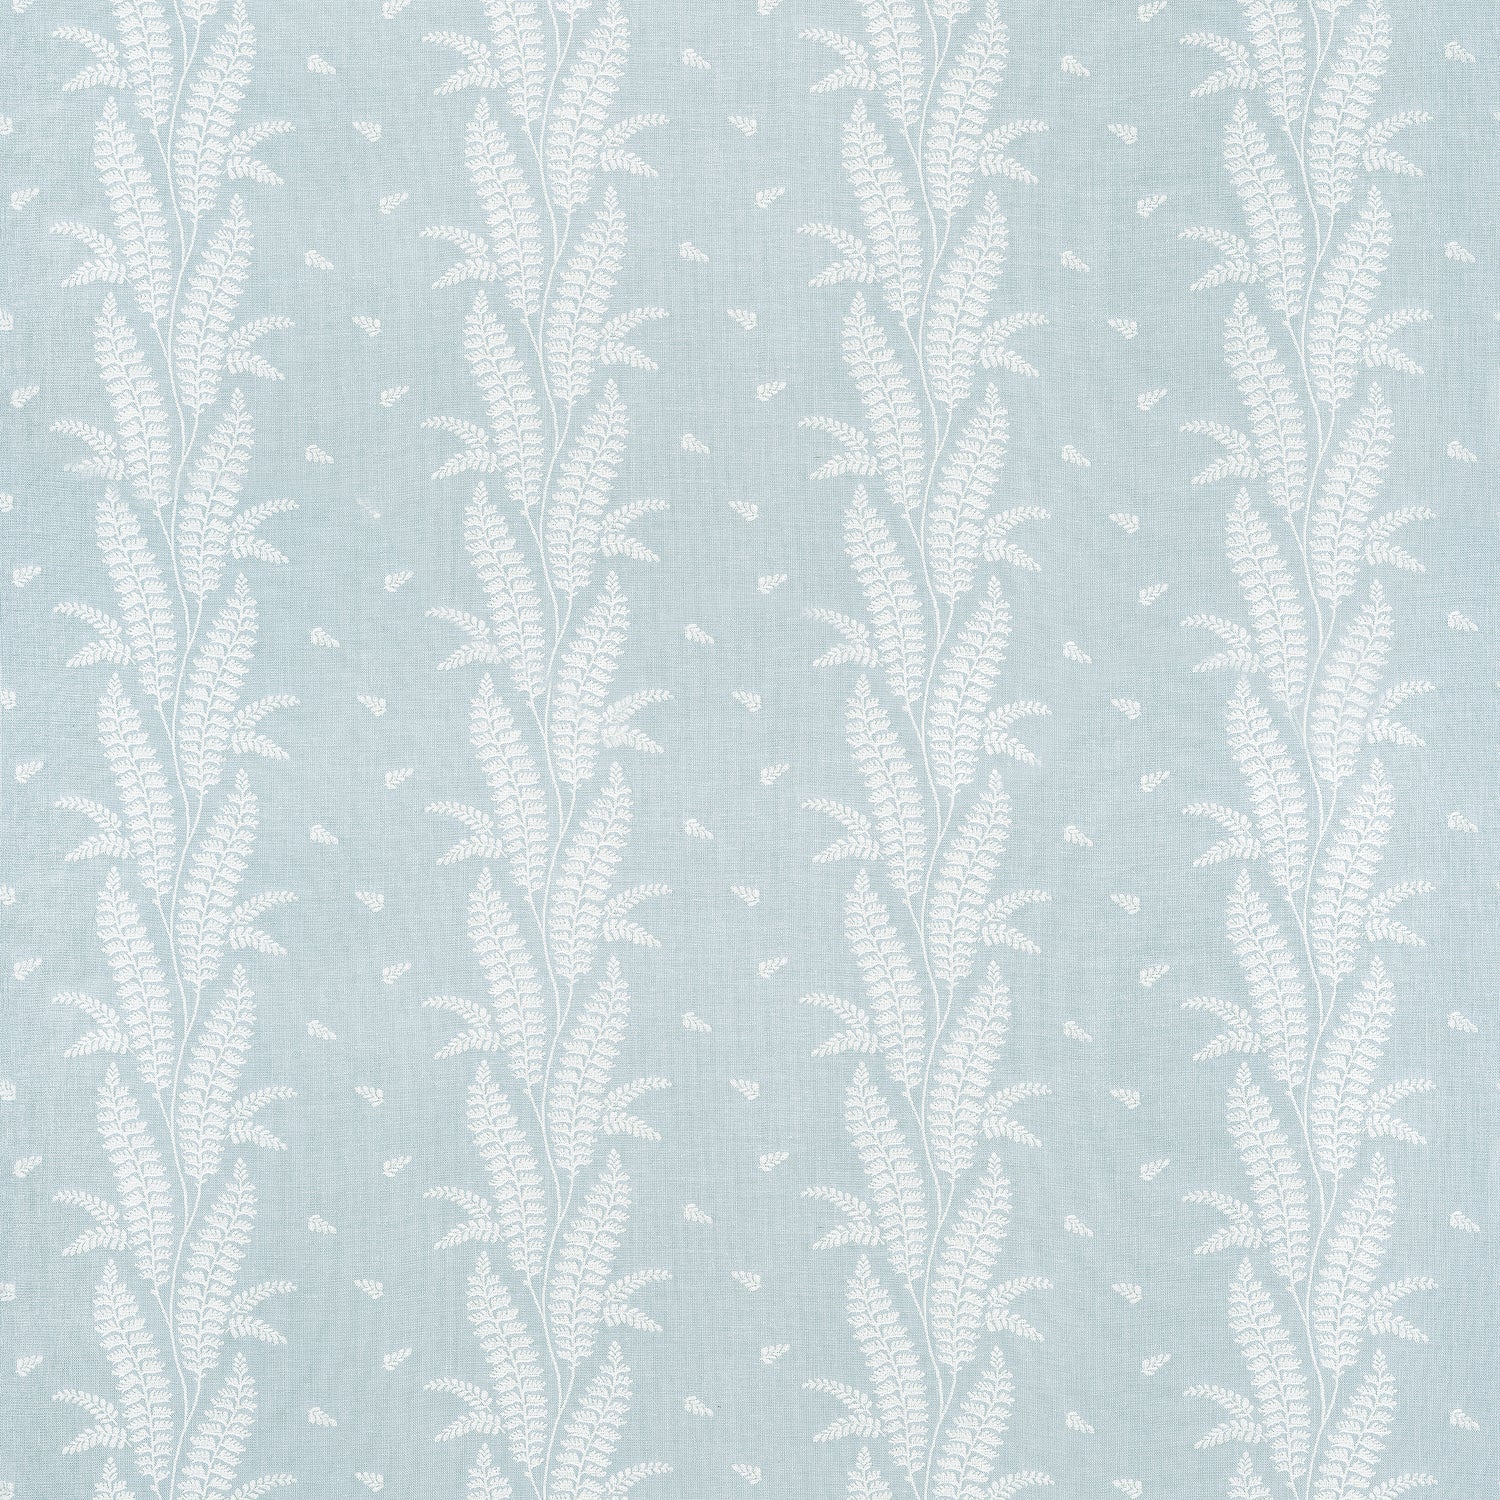 Ensbury Fern fabric in soft blue color - pattern number AW57825 - by Anna French in the Bristol collection